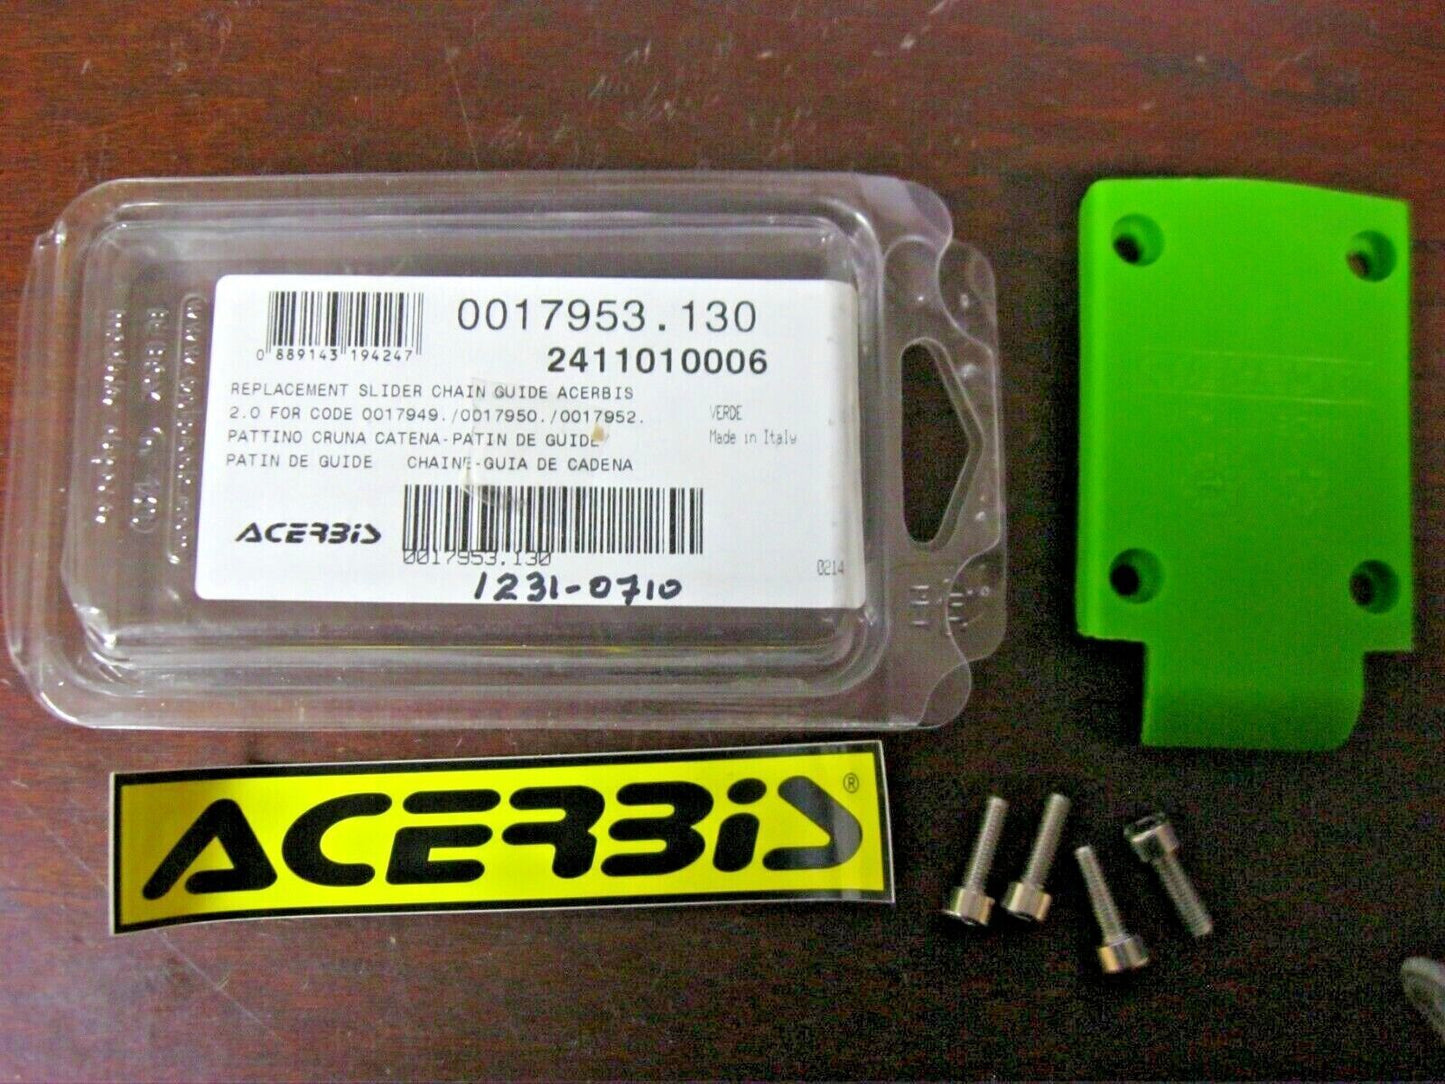 Acerbis 09-18 KX450F KX250F Replacement Insert for Chain Guide Blocks 2411010006